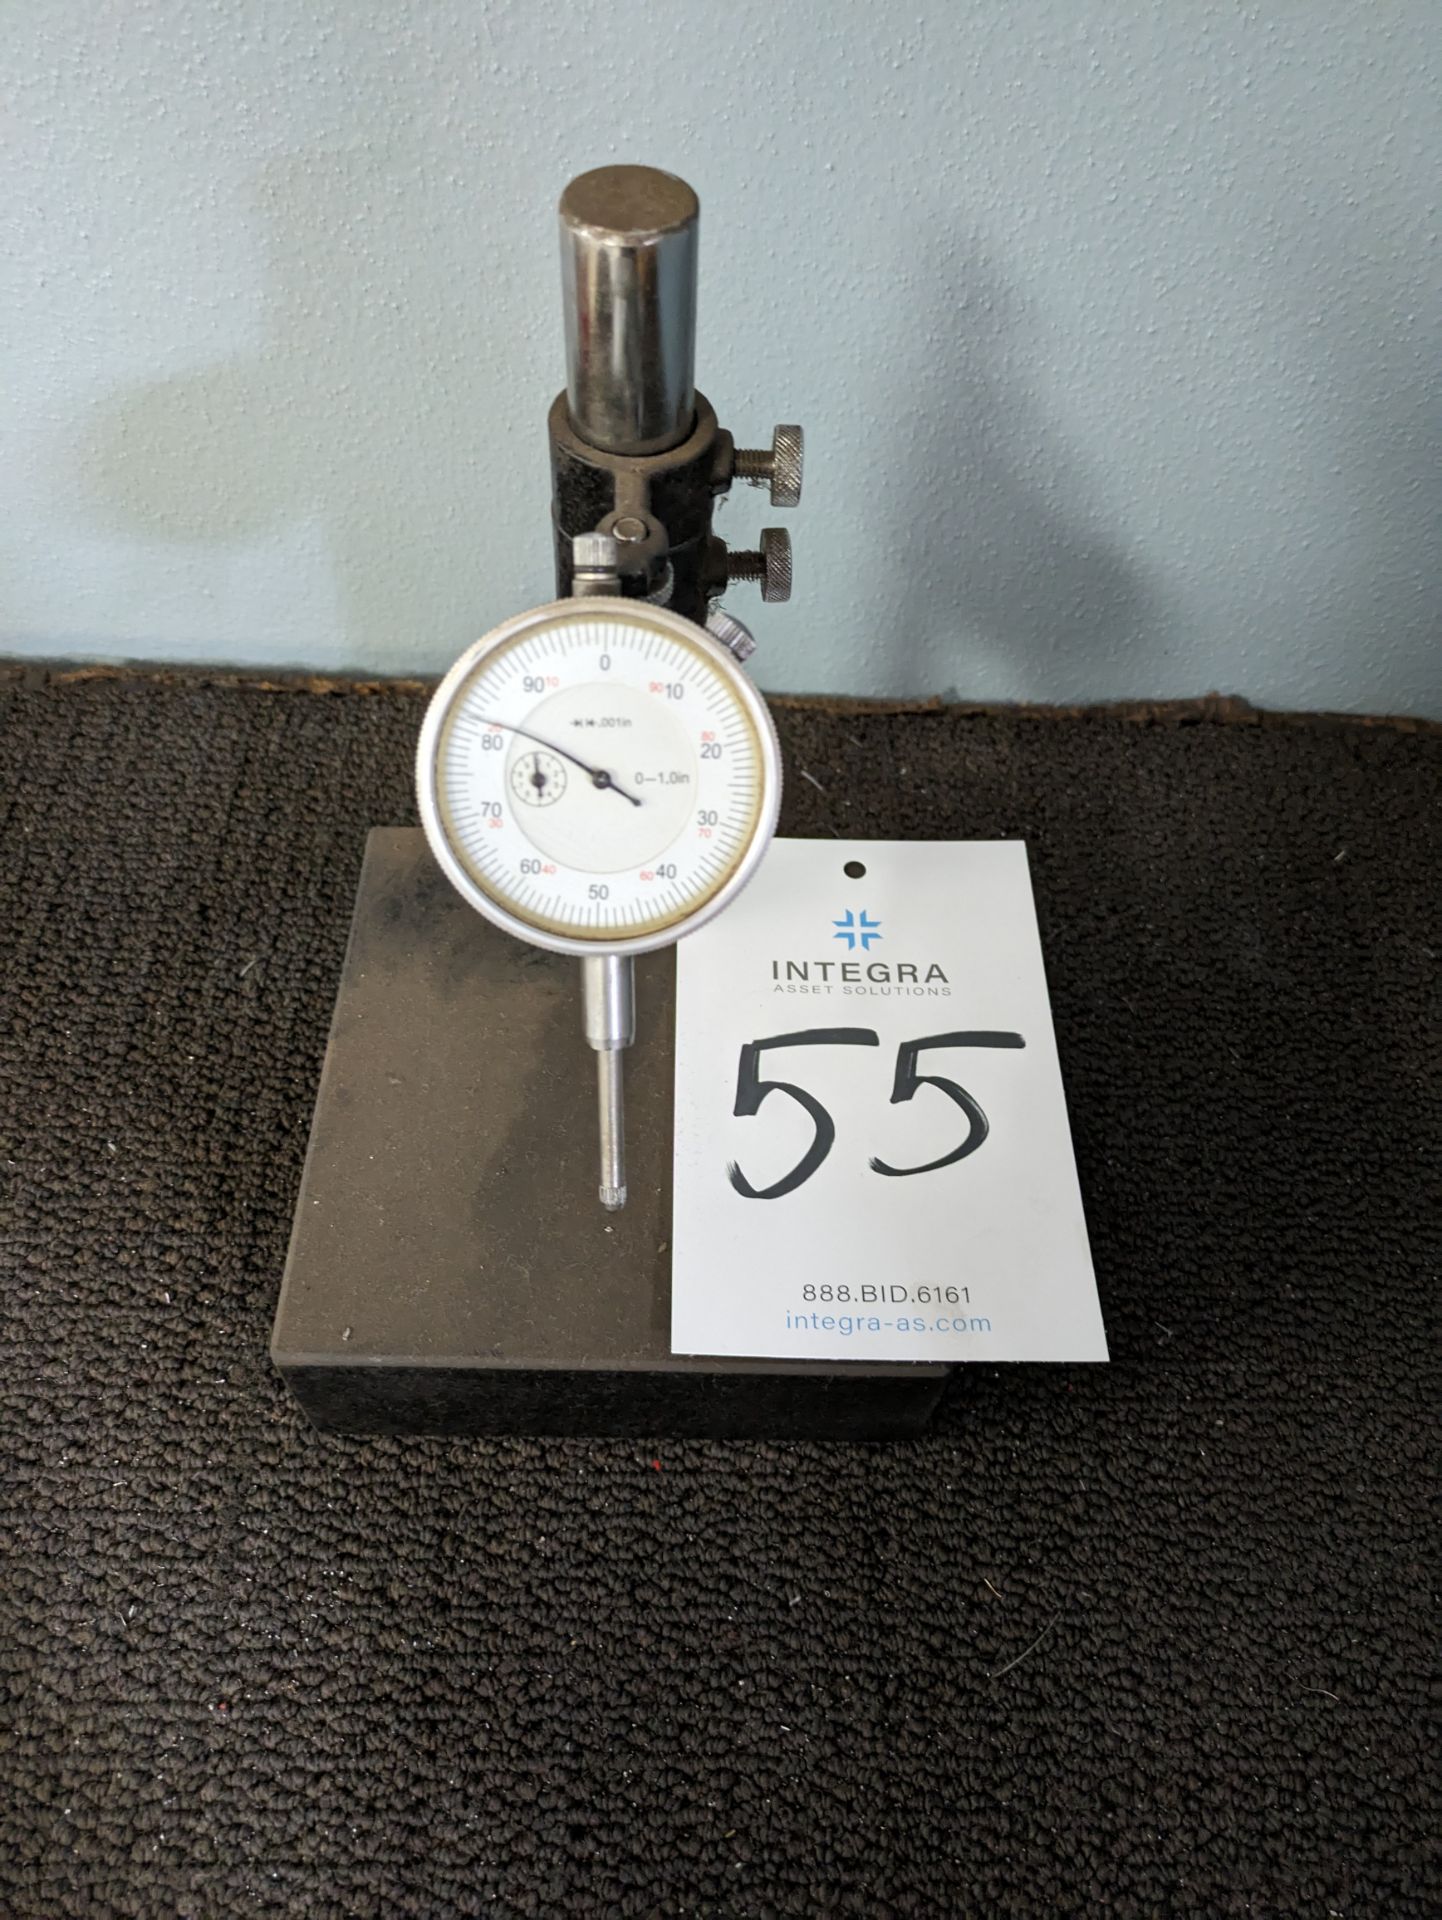 6" x 6" Base Plate with Dial Indicator